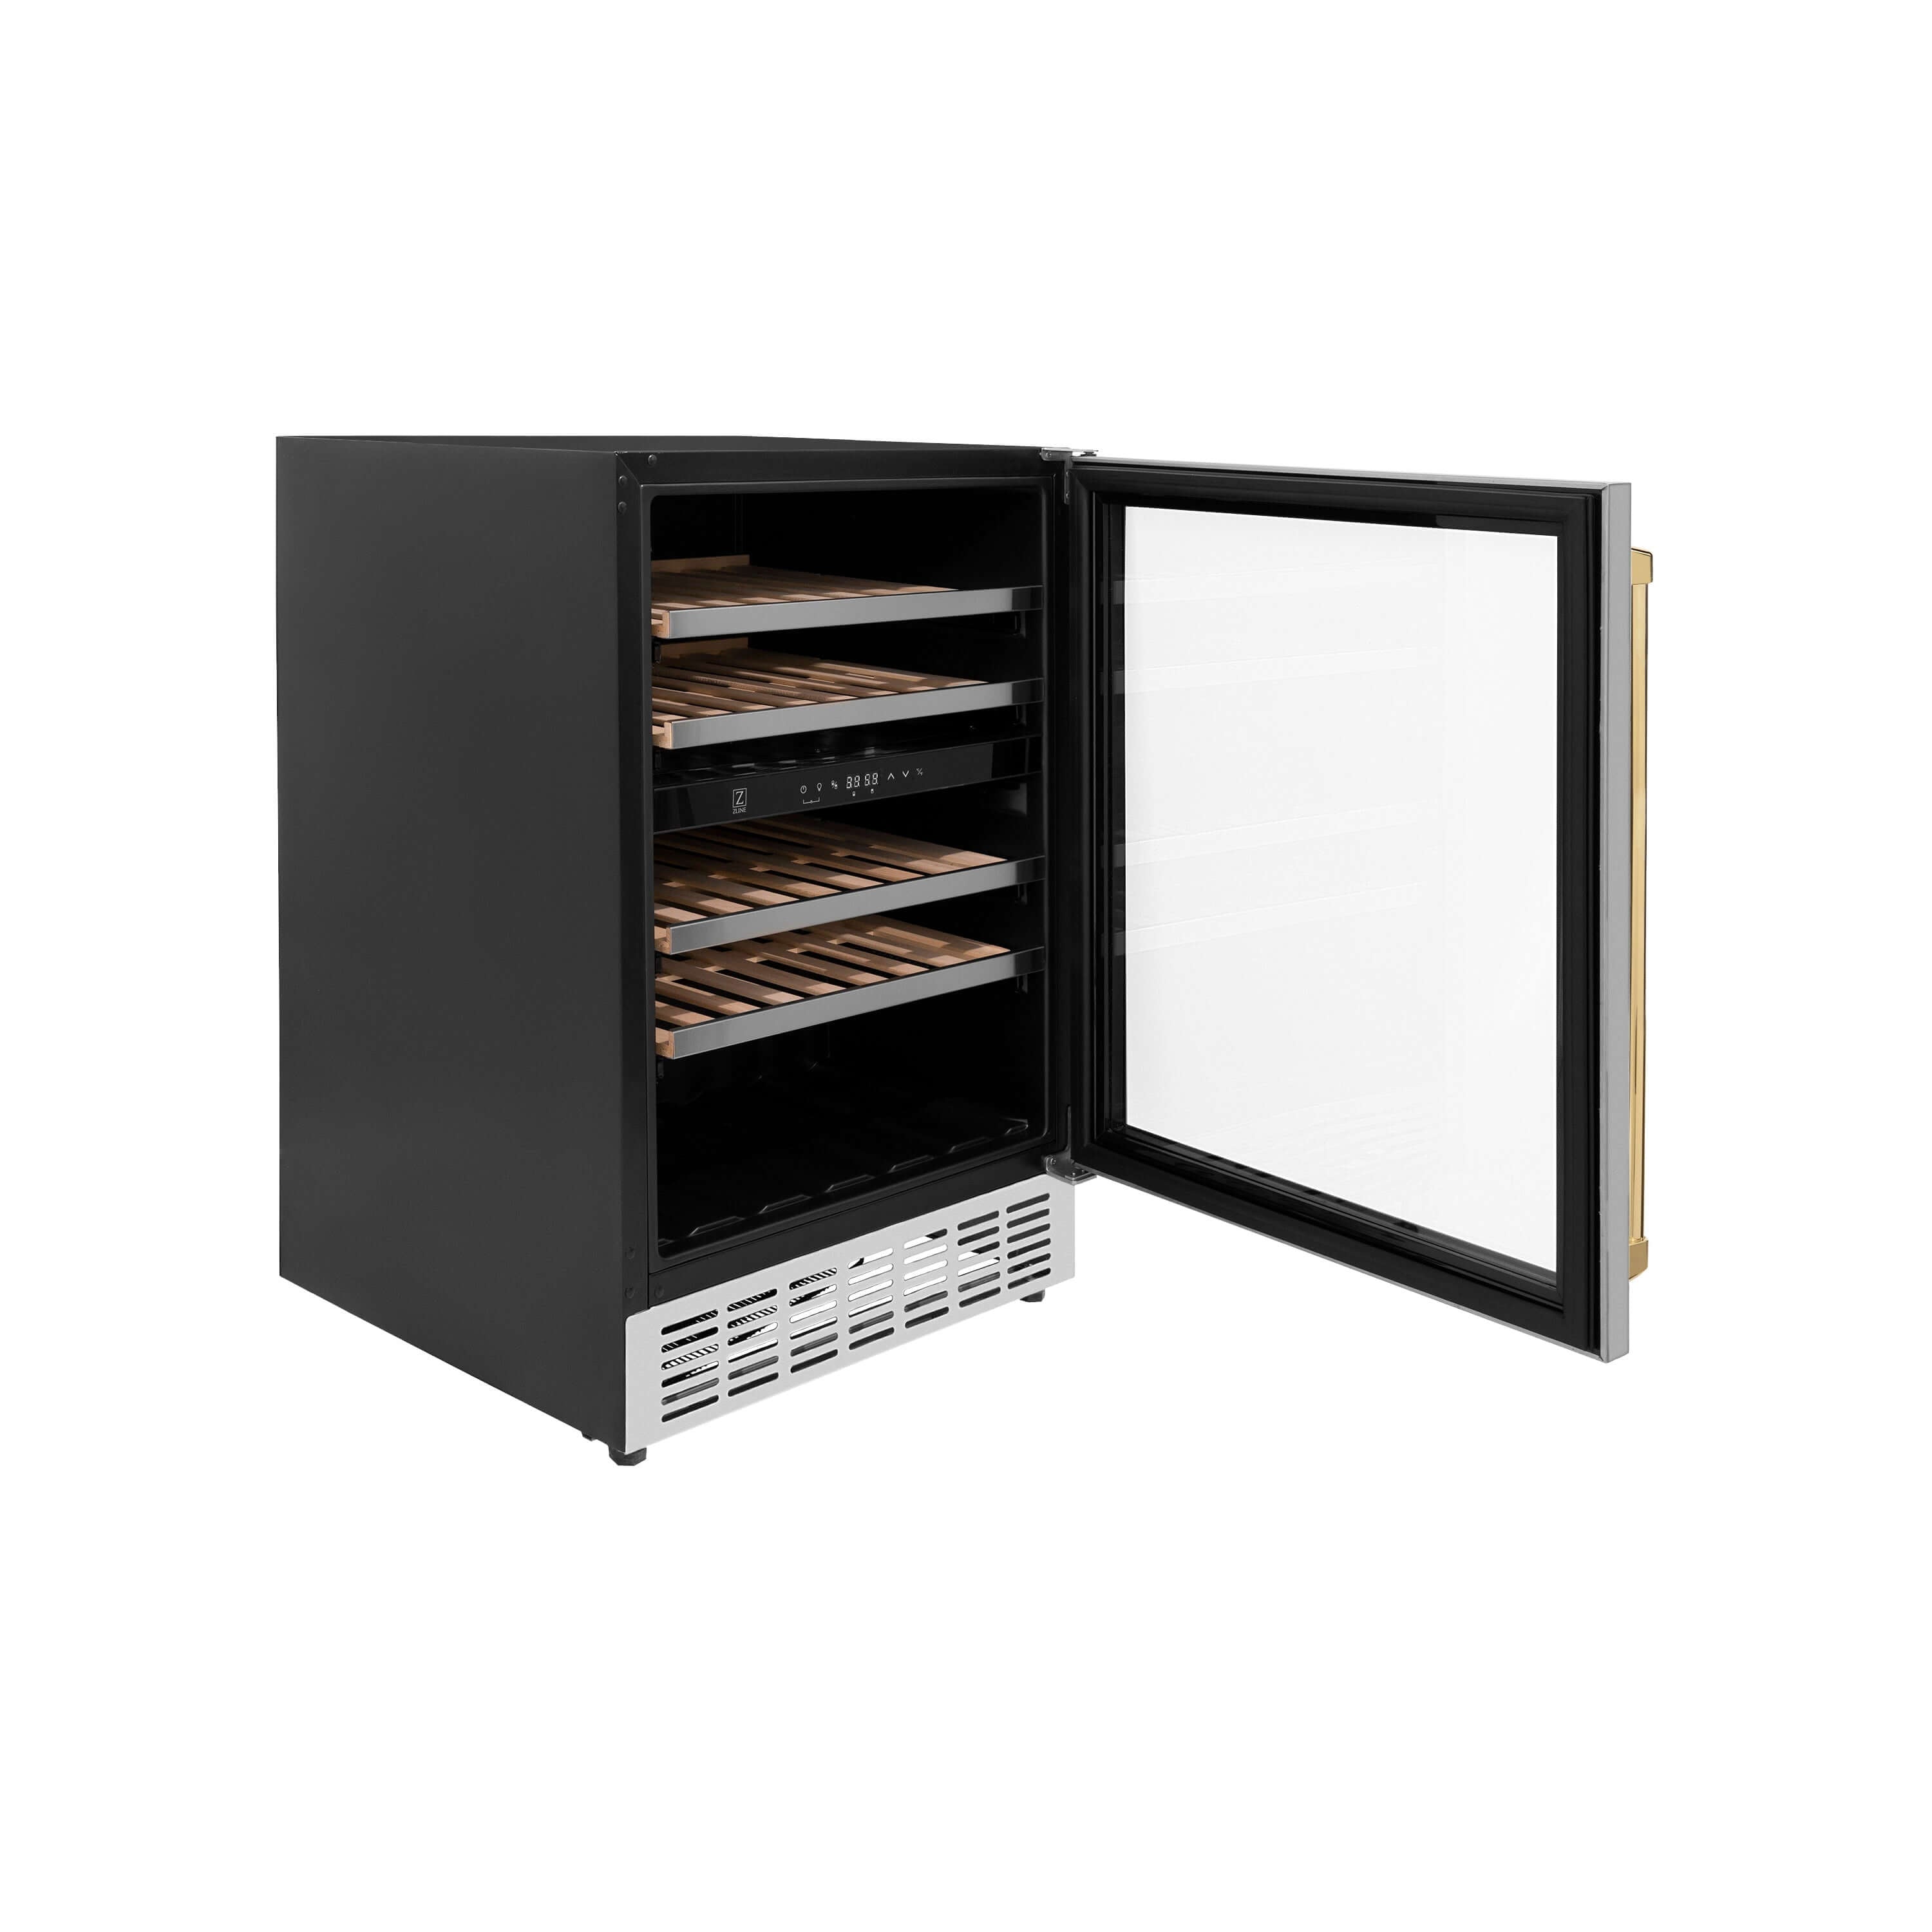 ZLINE Autograph Edition 24 in. Monument Dual Zone 44-Bottle Wine Cooler in Stainless Steel with Polished Gold Accents (RWVZ-UD-24-G) side, door open.